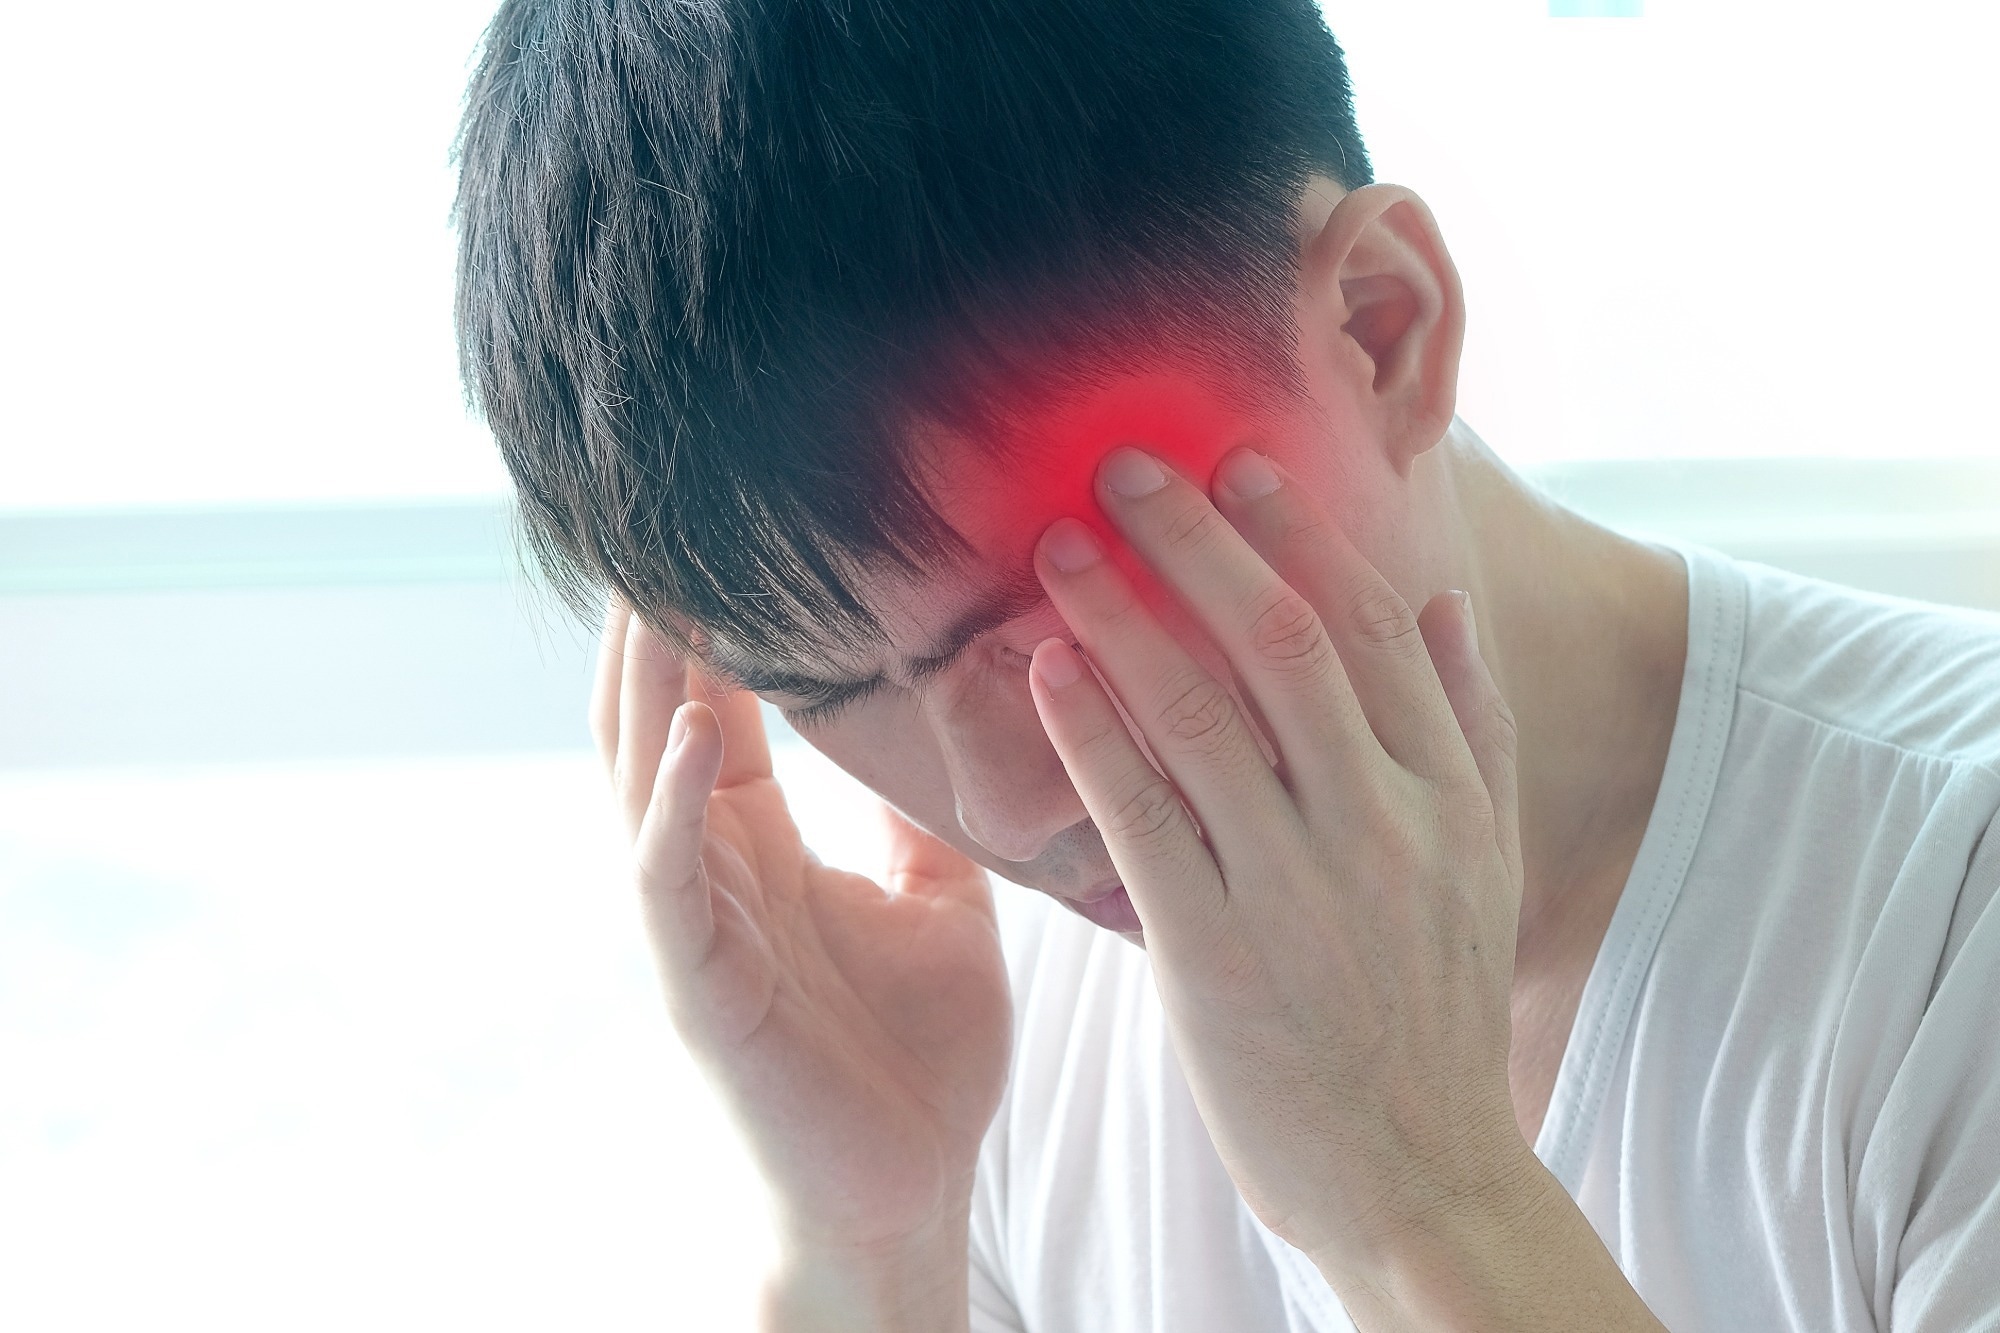 Study: Machine Learning Models for Classification of Migraine Headaches. Image credit: Me dia/Shutterstock